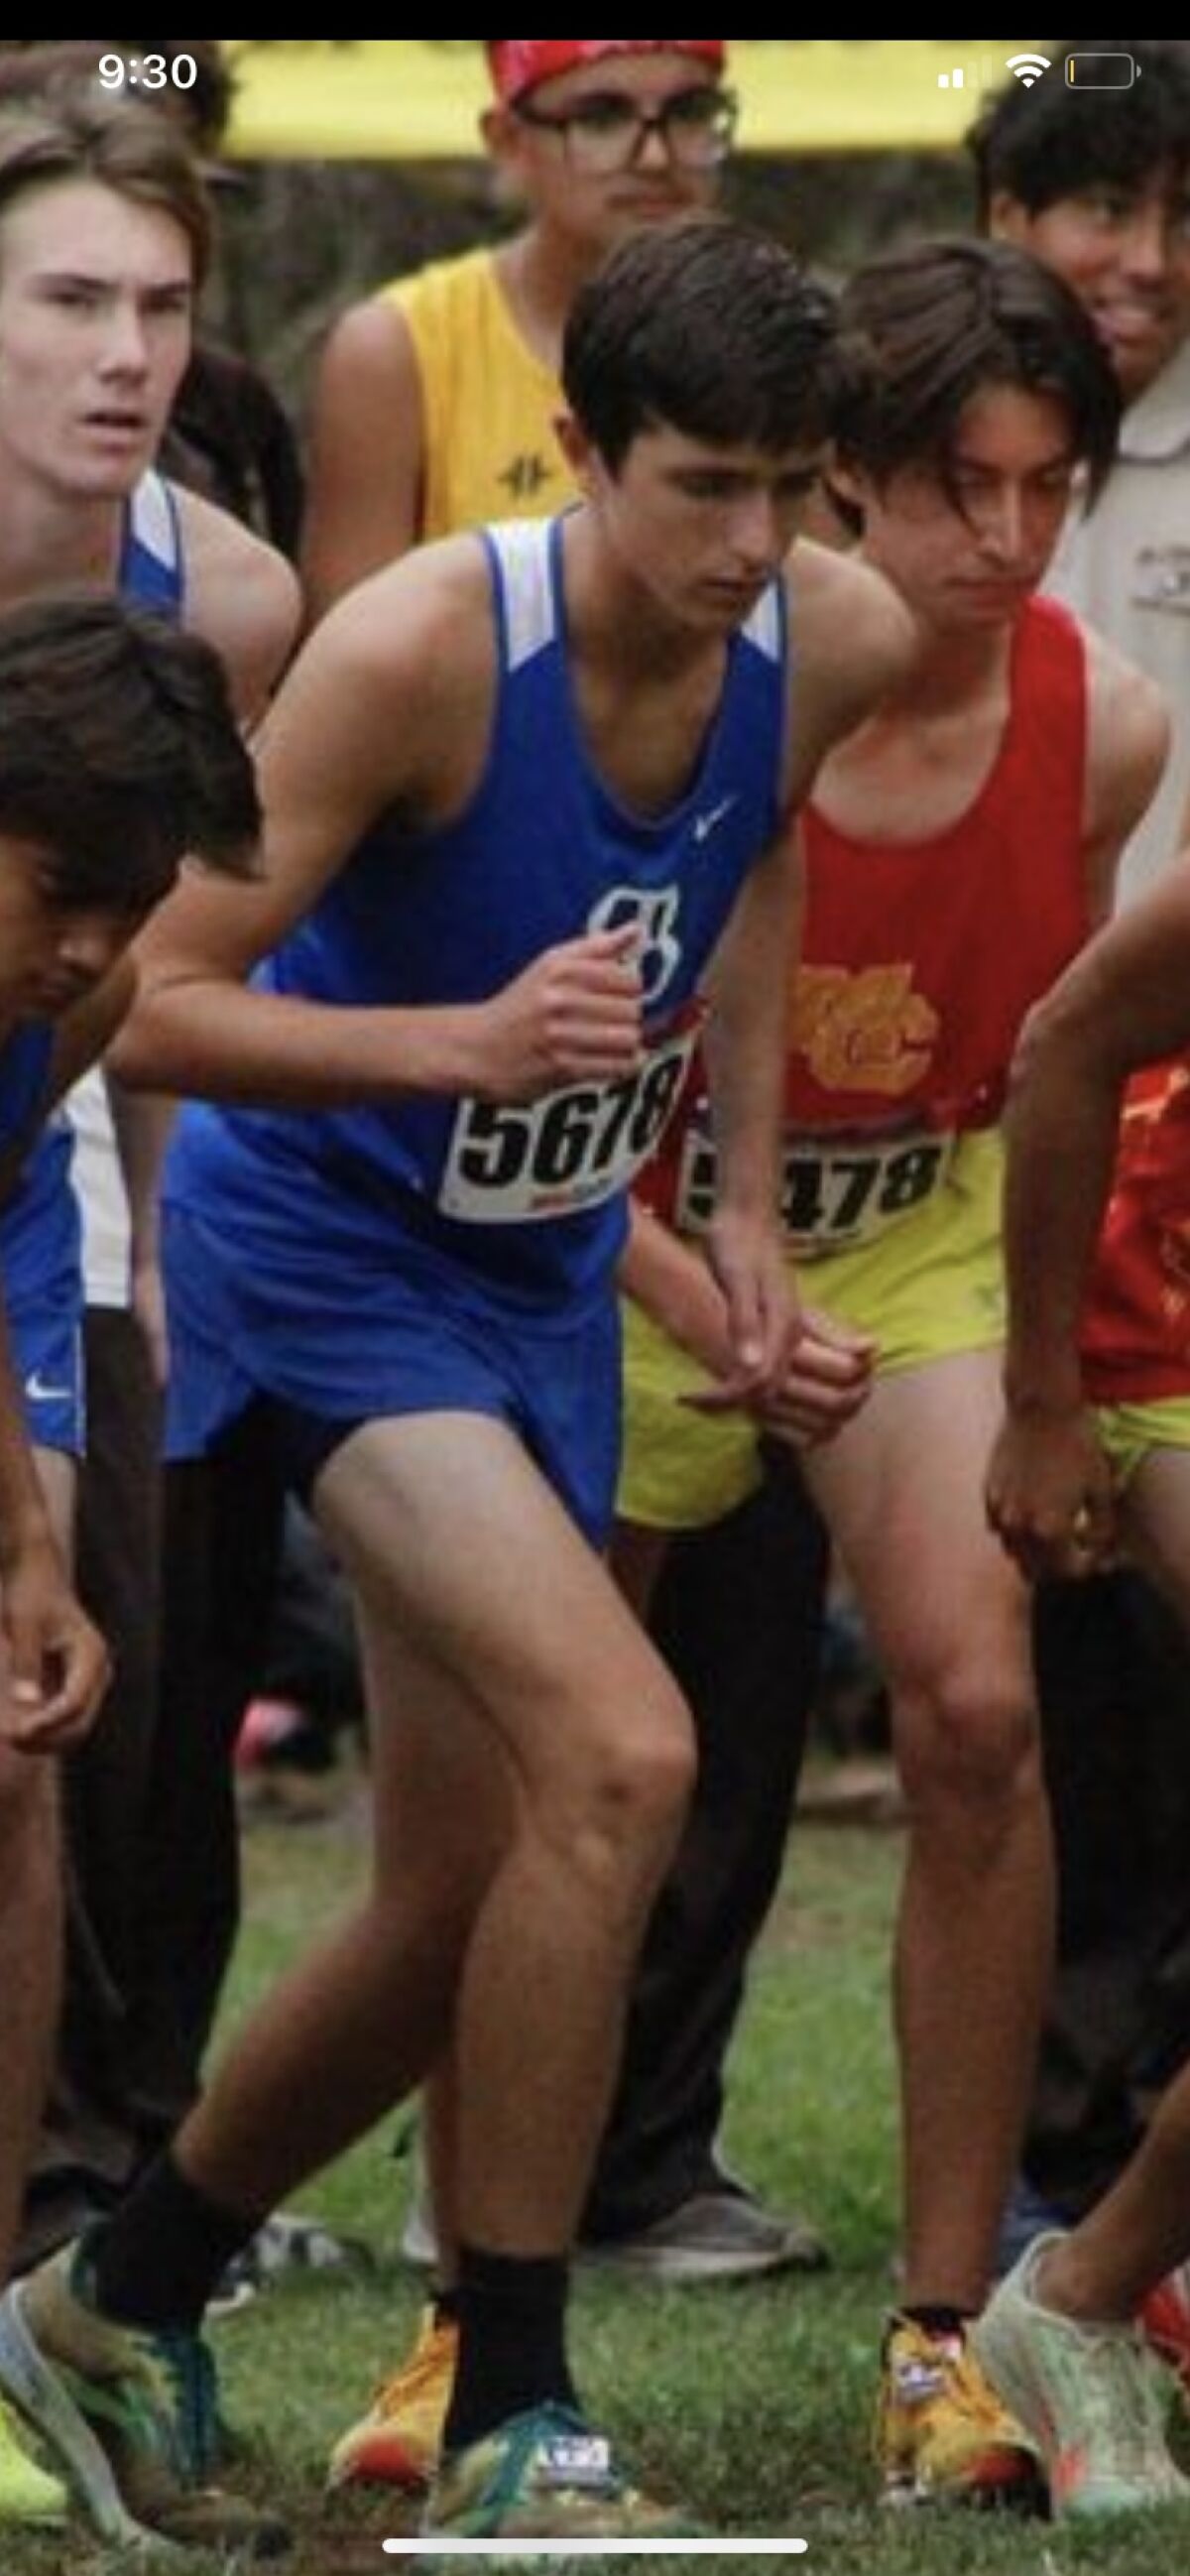 As a senior at RB High, Brandon Day has discovered a love for cross country.